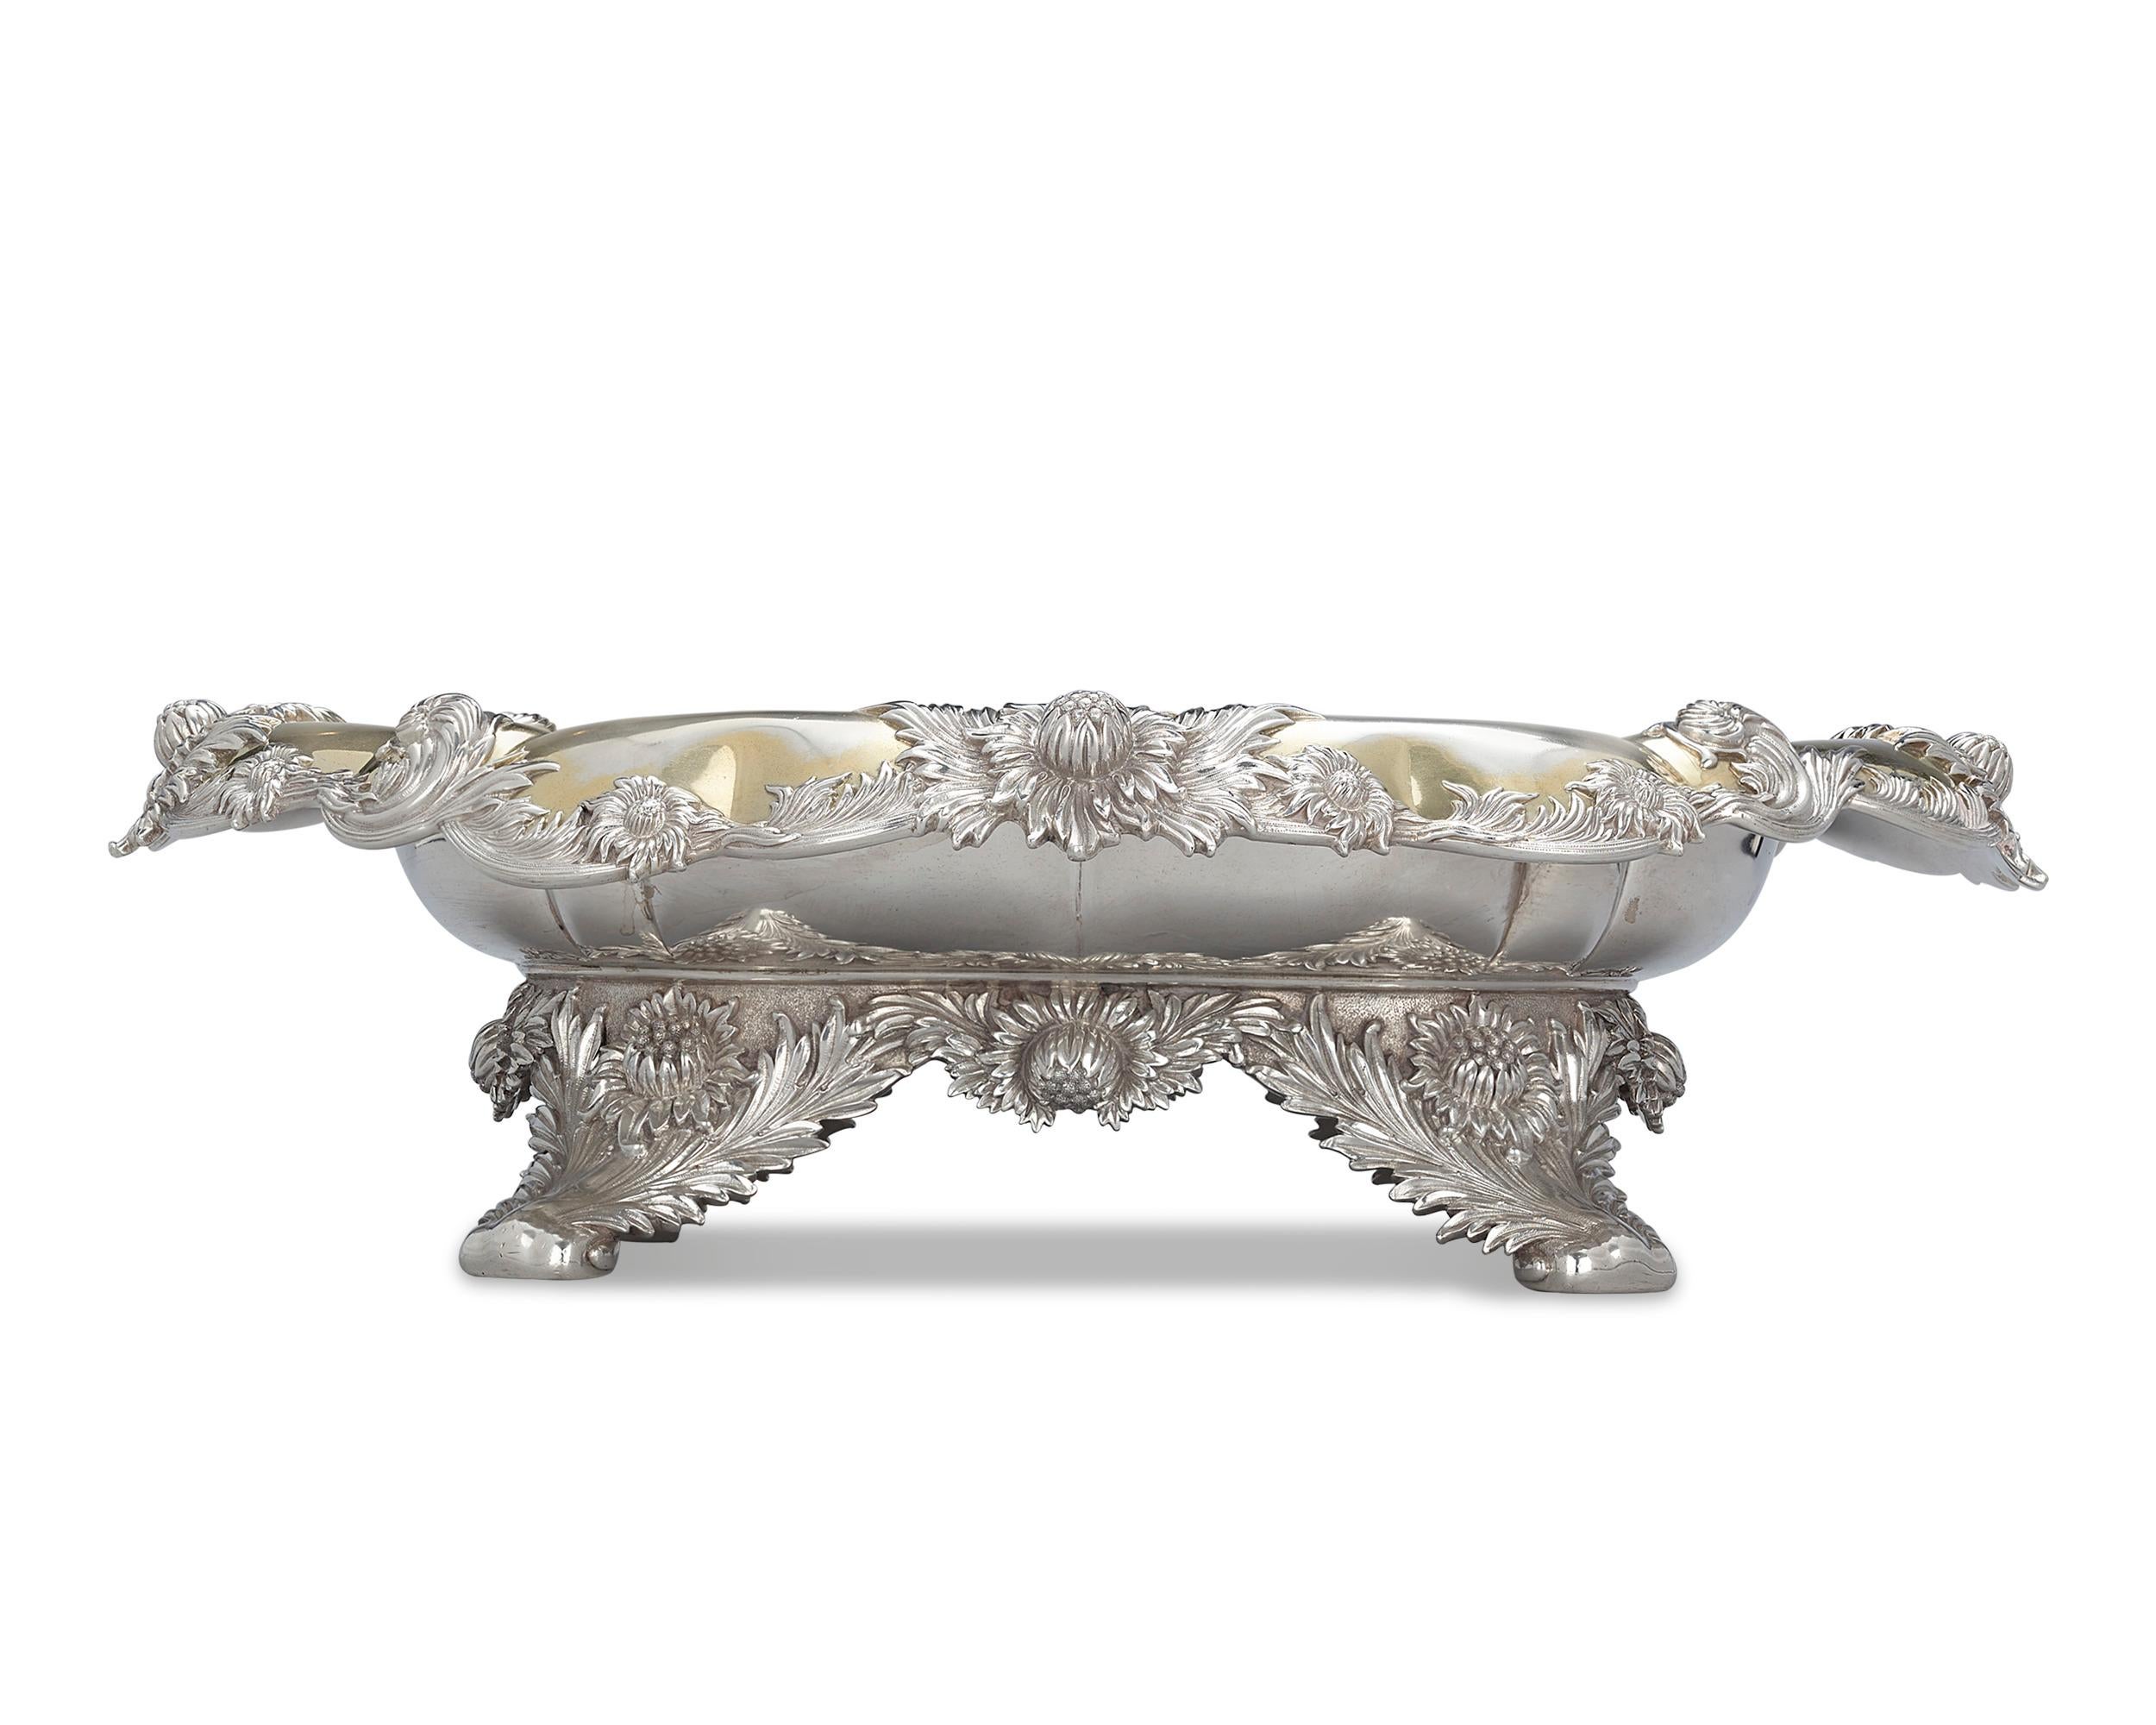 Dating to the first era of Tiffany & Co. silver production, this resplendent footed centerpiece boasts the exquisitely refined blooms of the Chrysanthemum pattern. Highlighting the form is a gilt wash interior that adds a layer of refinement to this